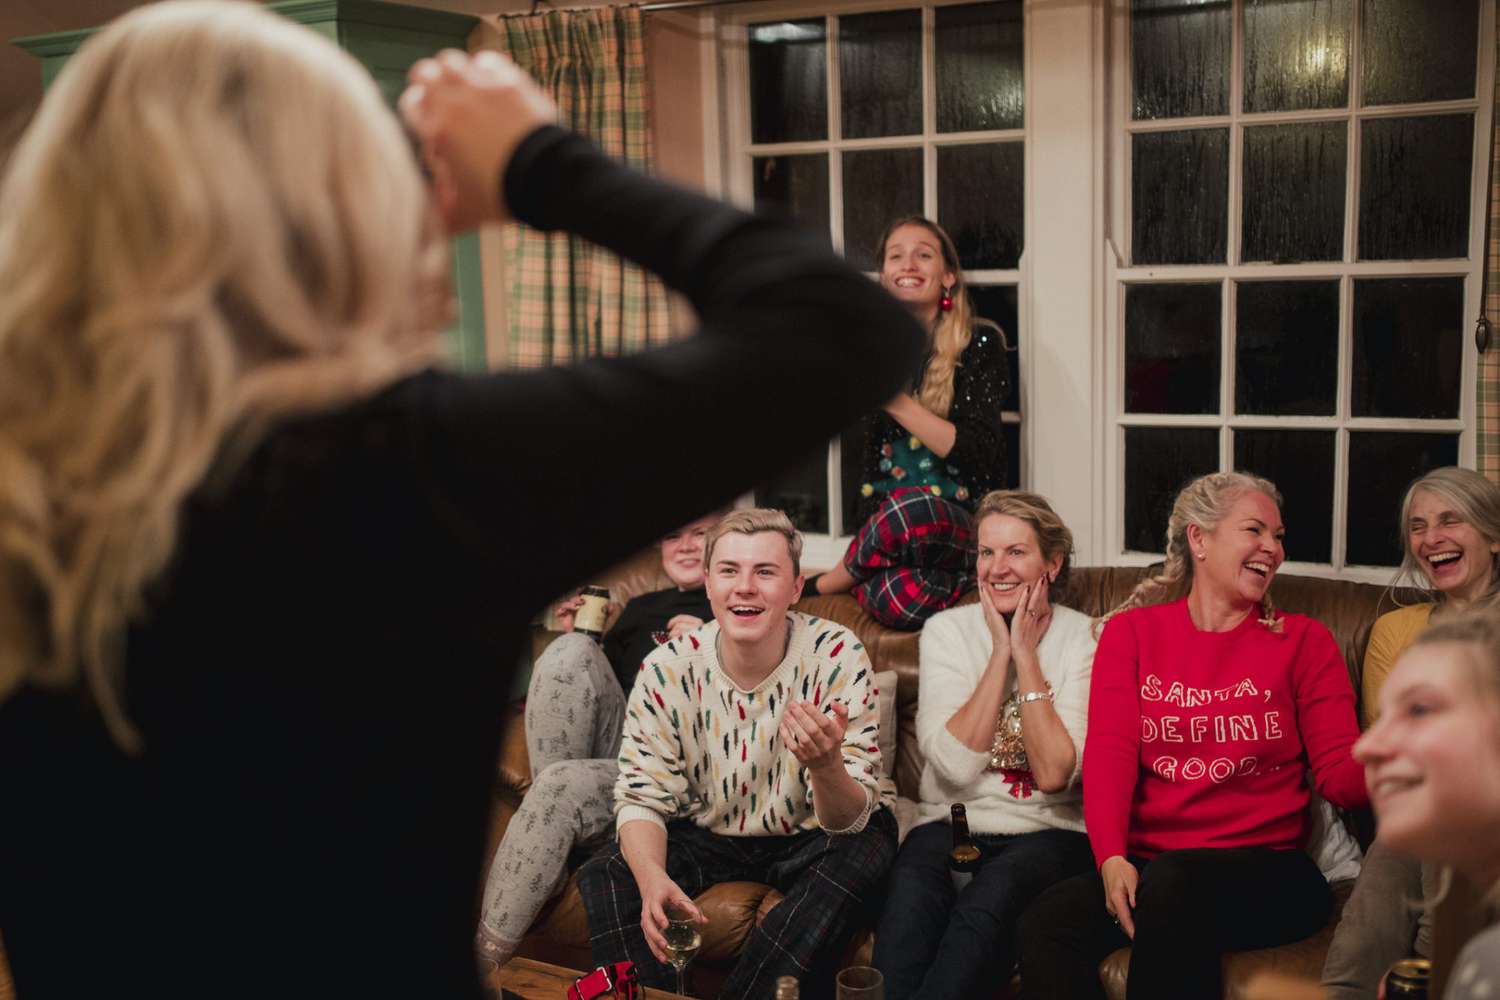 A woman capturing a moment with her friends in a cozy living room